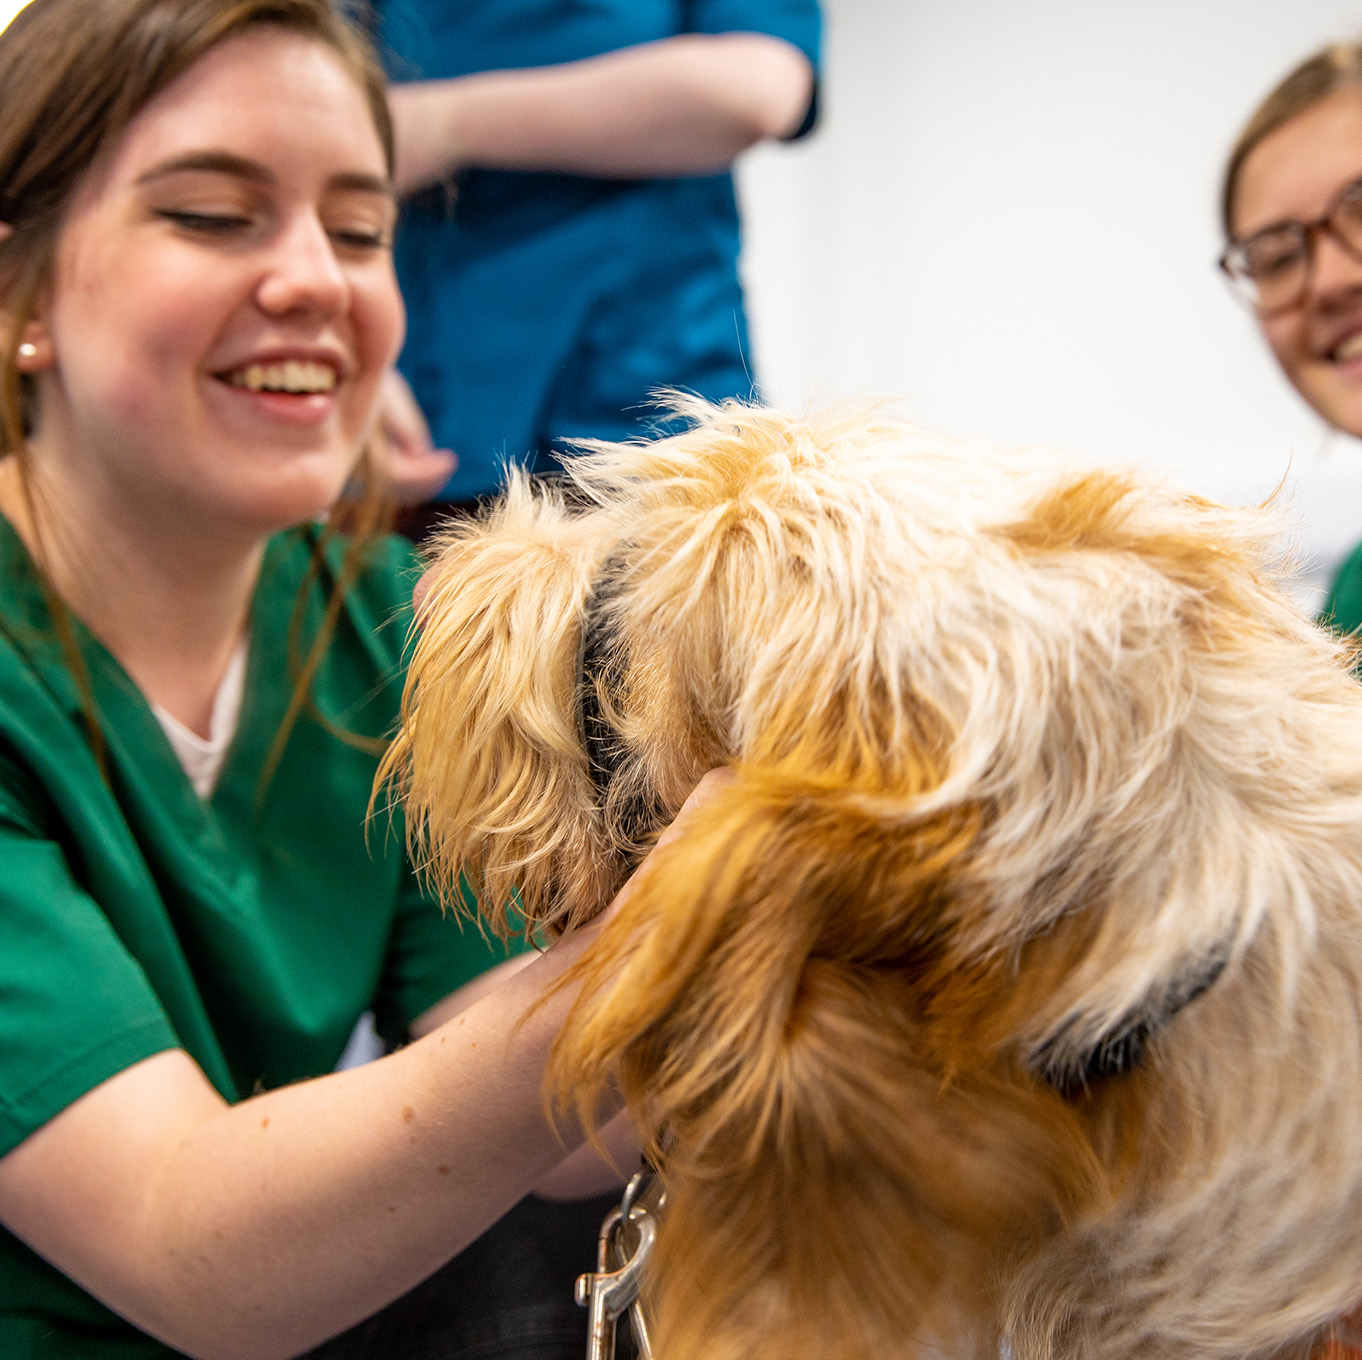 A veterinary nursing student is smiling and petting a brown dog